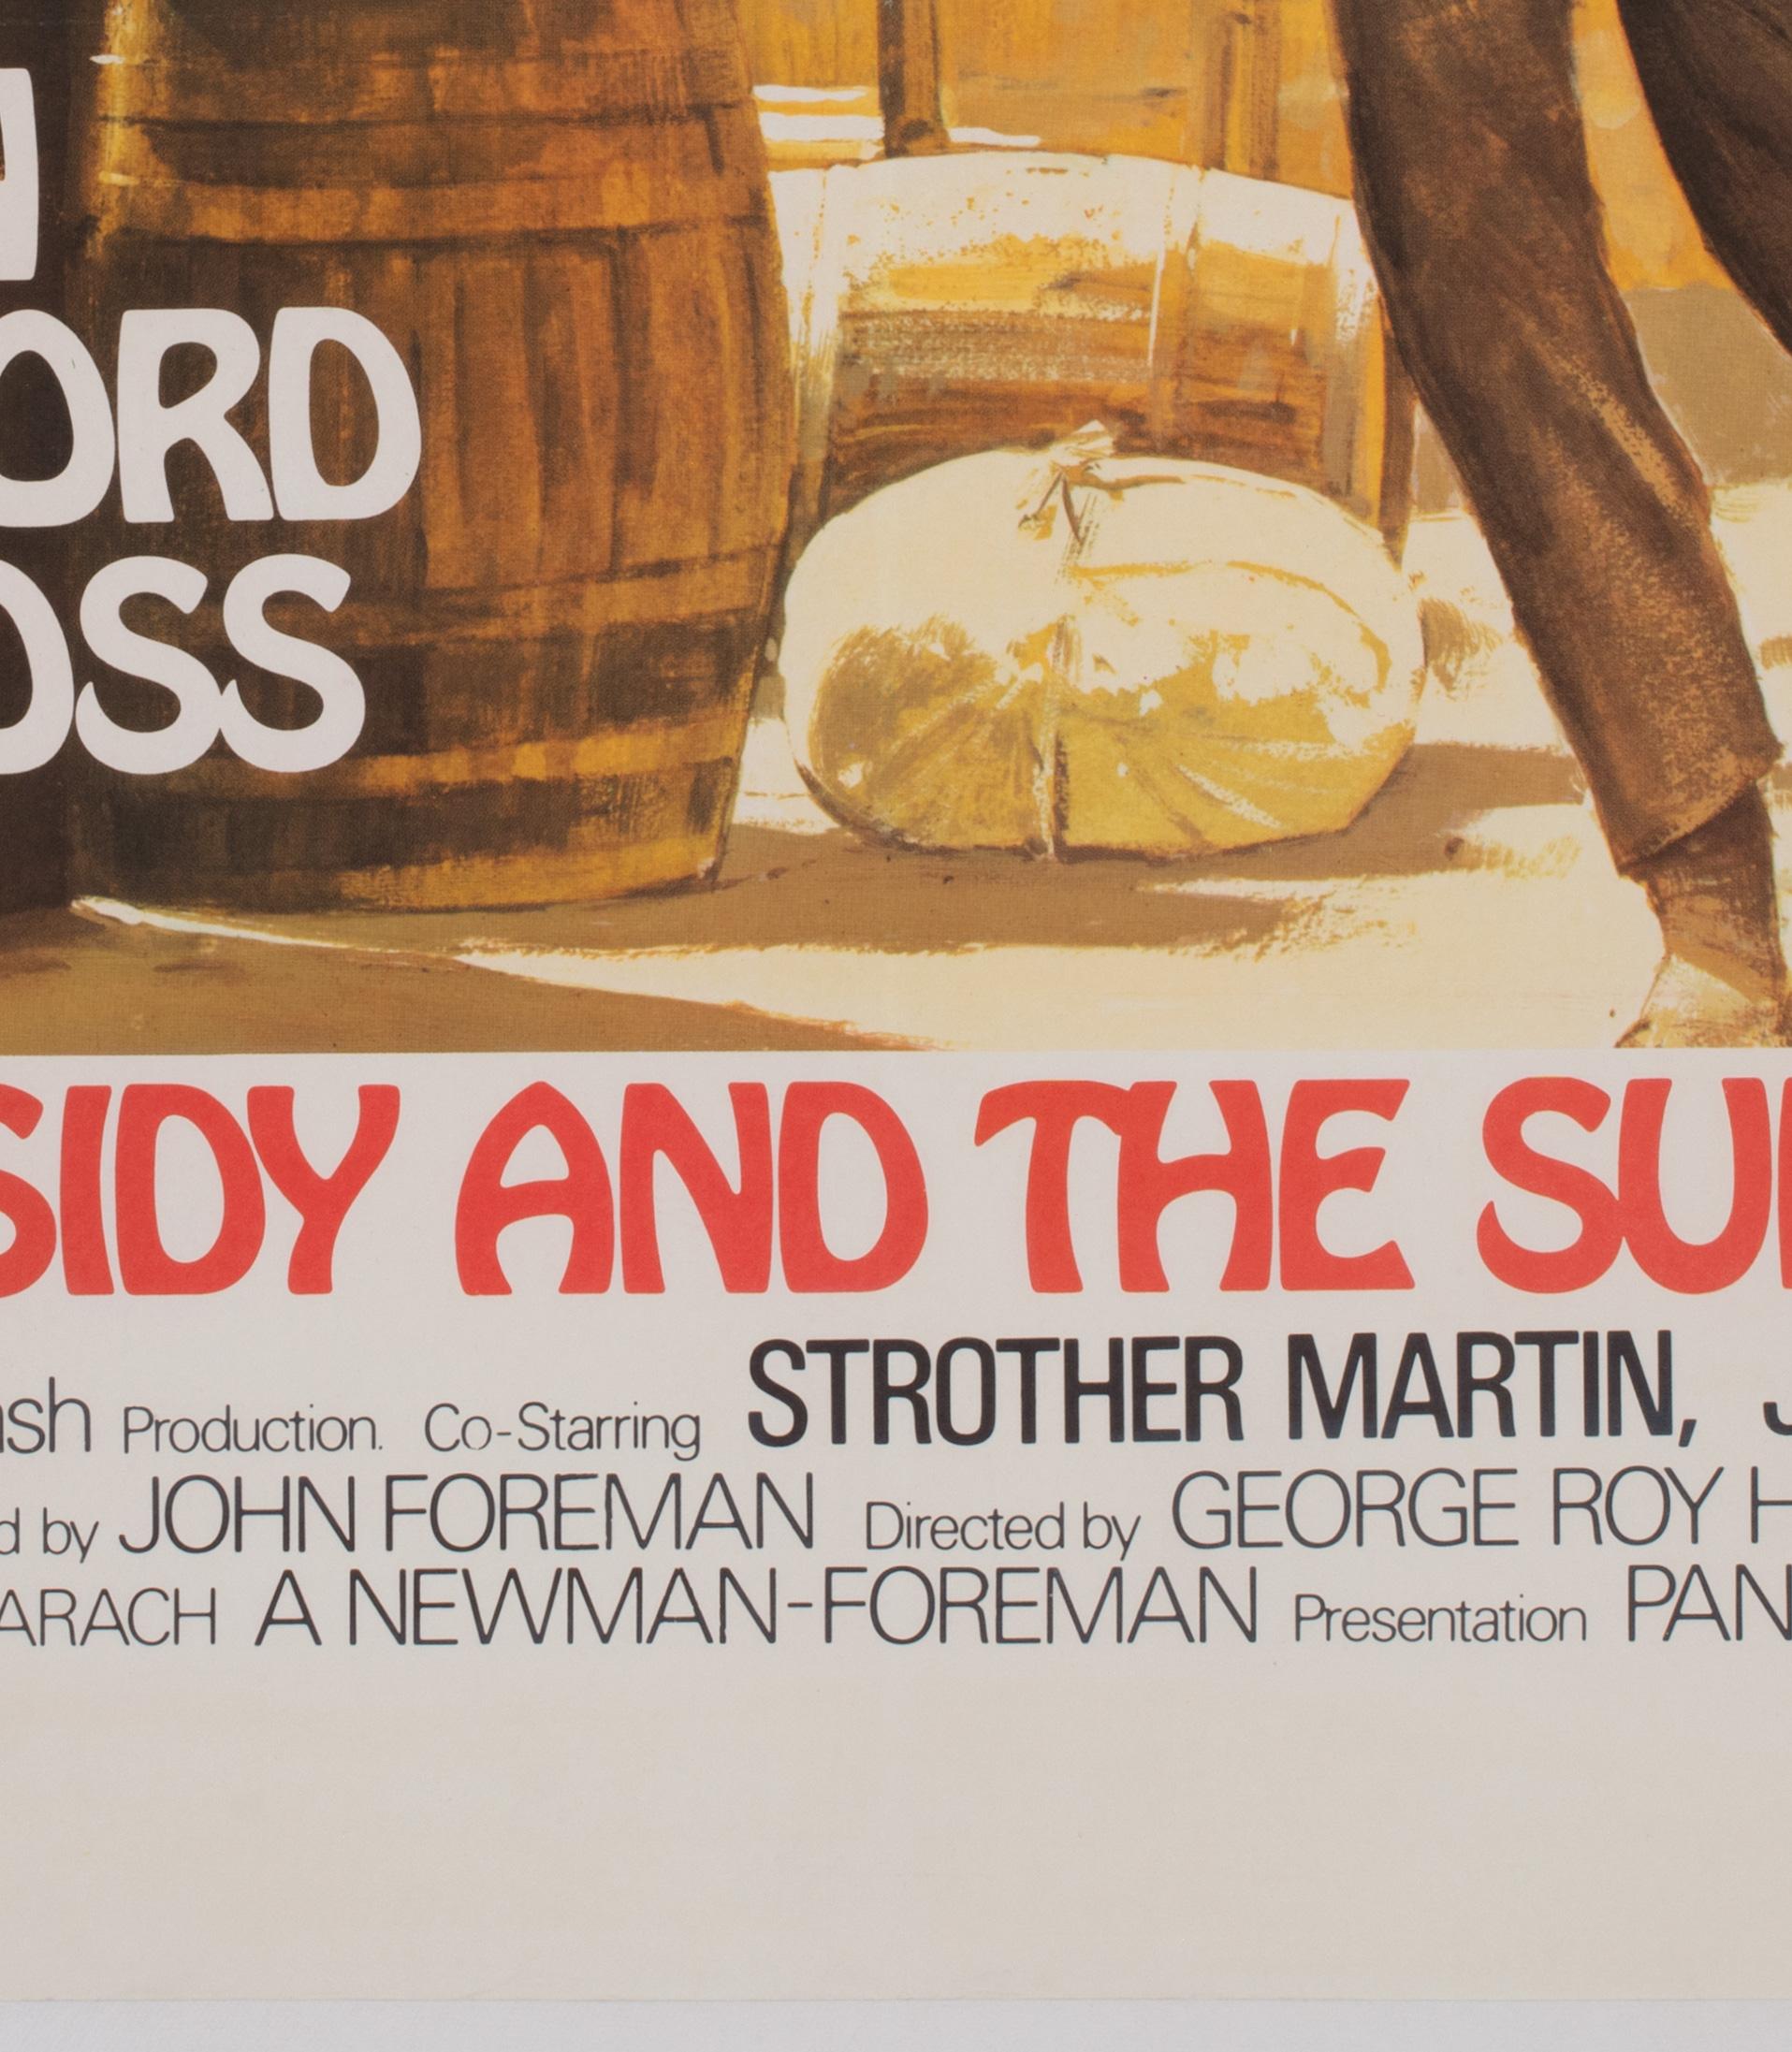 Butch Cassidy and the Sundance Kid UK Film Movie Poster, Tom Beauvais, 1969 For Sale 1